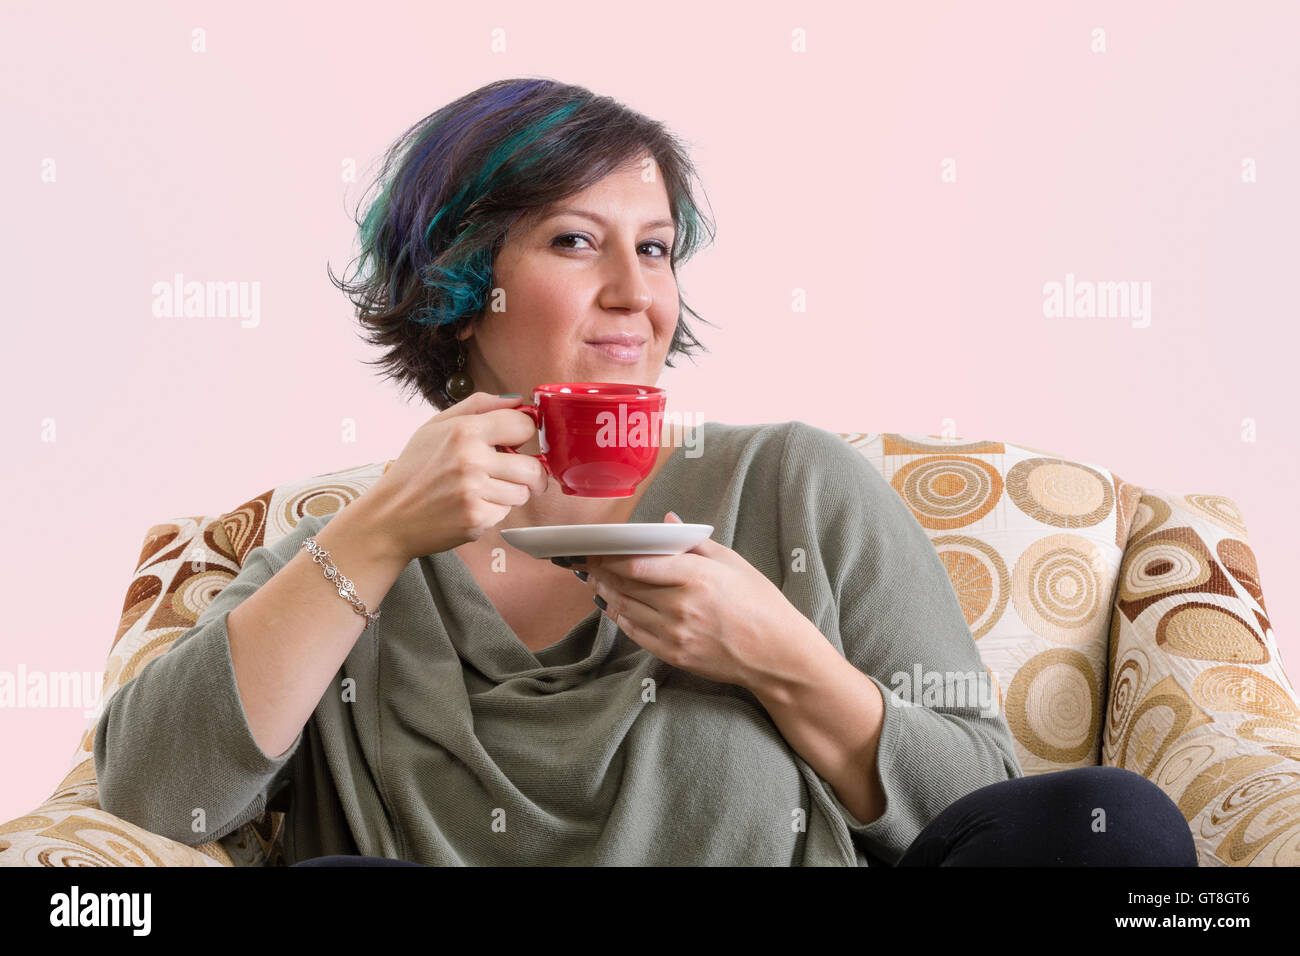 Single intelligent grinning adult female holding red coffee mug while sitting in a comfortable sofa chair Stock Photo